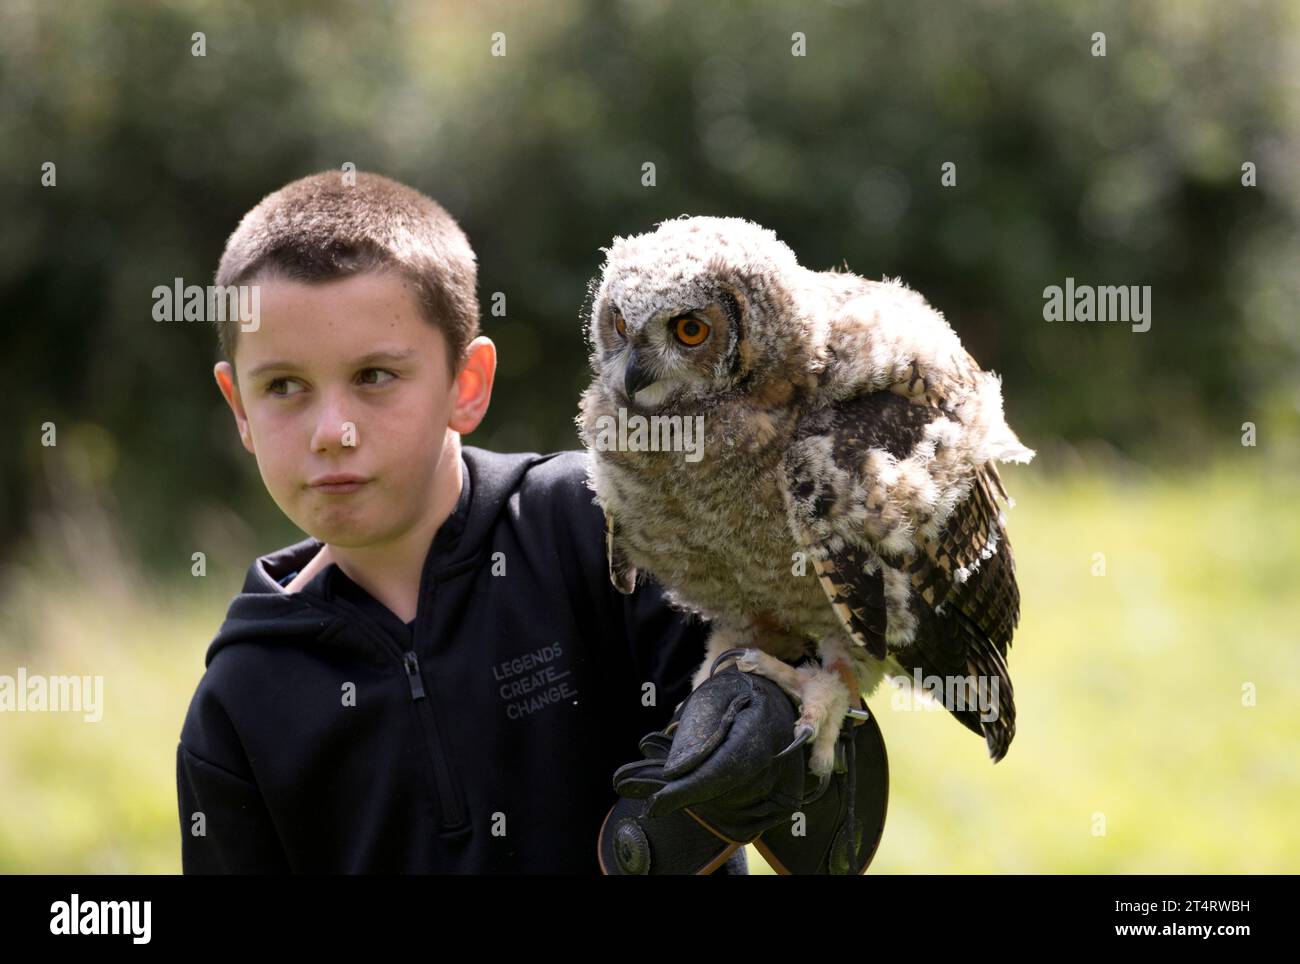 Young boy holding Eastern Siberian Eagle owl Bubo bubo yenisseensis on his arm at Cotswold Falconry Centre Batsford UK Stock Photo